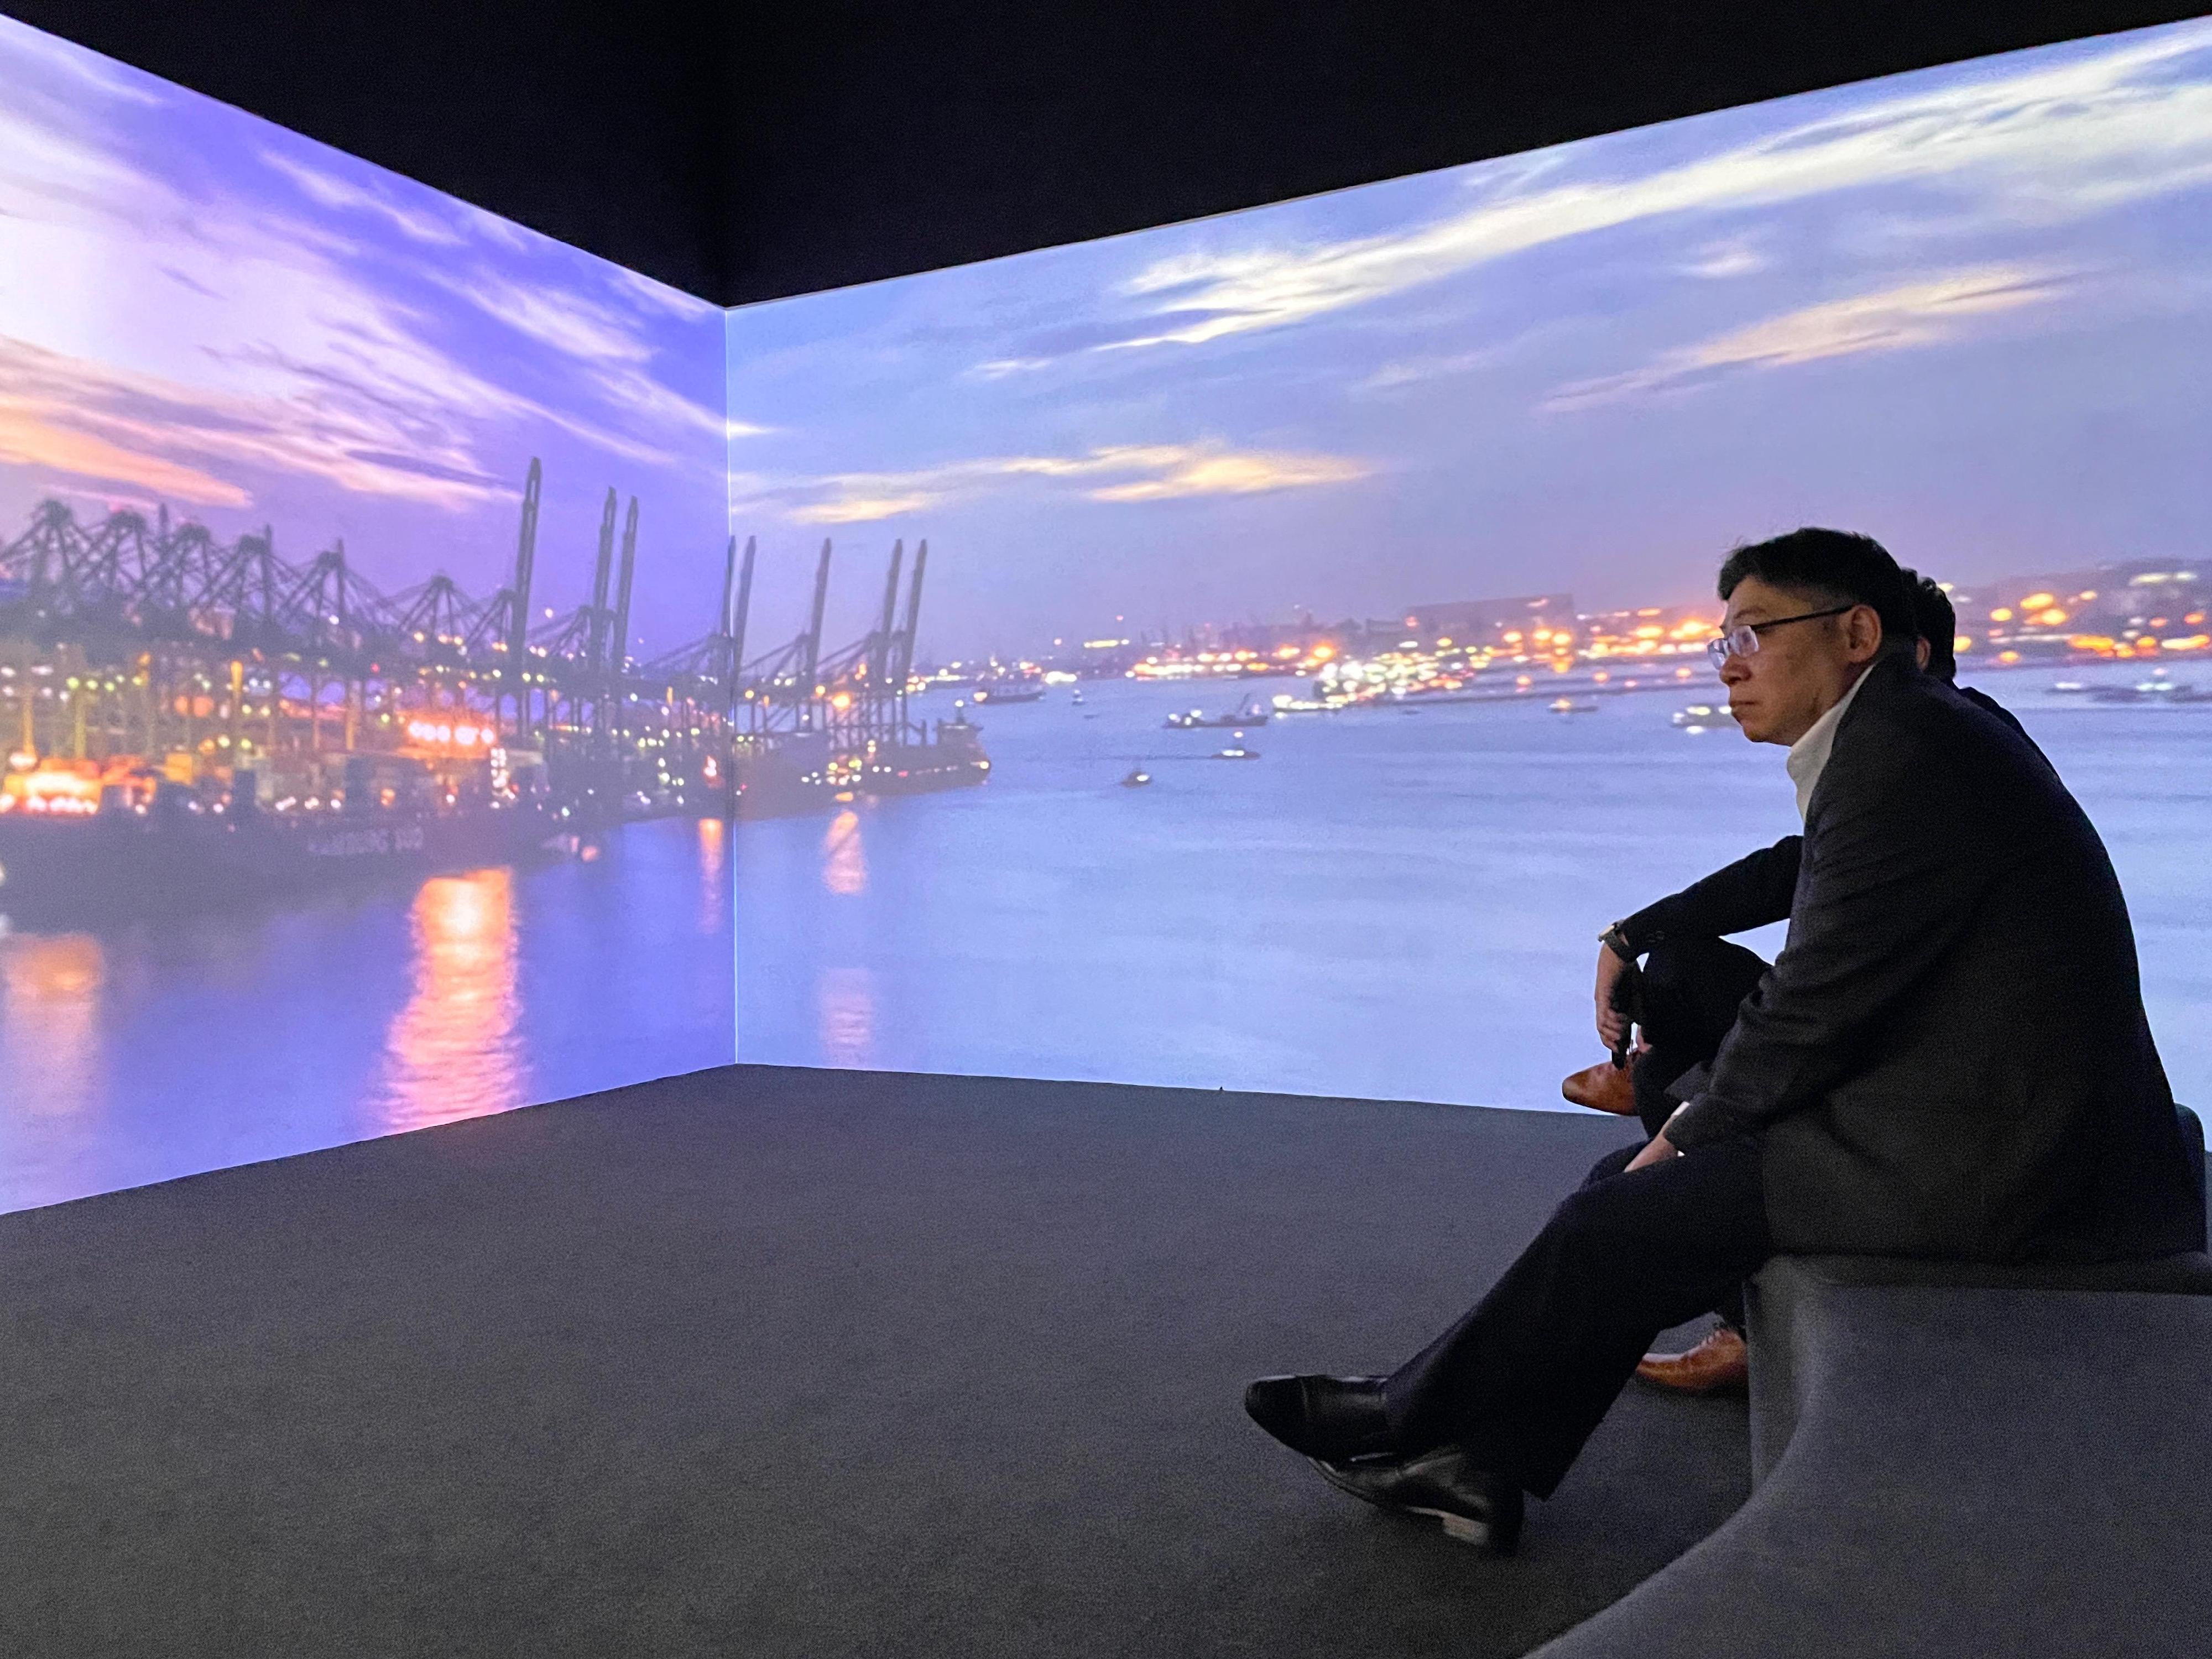 The Secretary for Transport and Logistics, Mr Lam Sai-hung, began his visit programme to Singapore today (January 30). Photo shows Mr Lam visiting an exhibition on the Tuas Port.